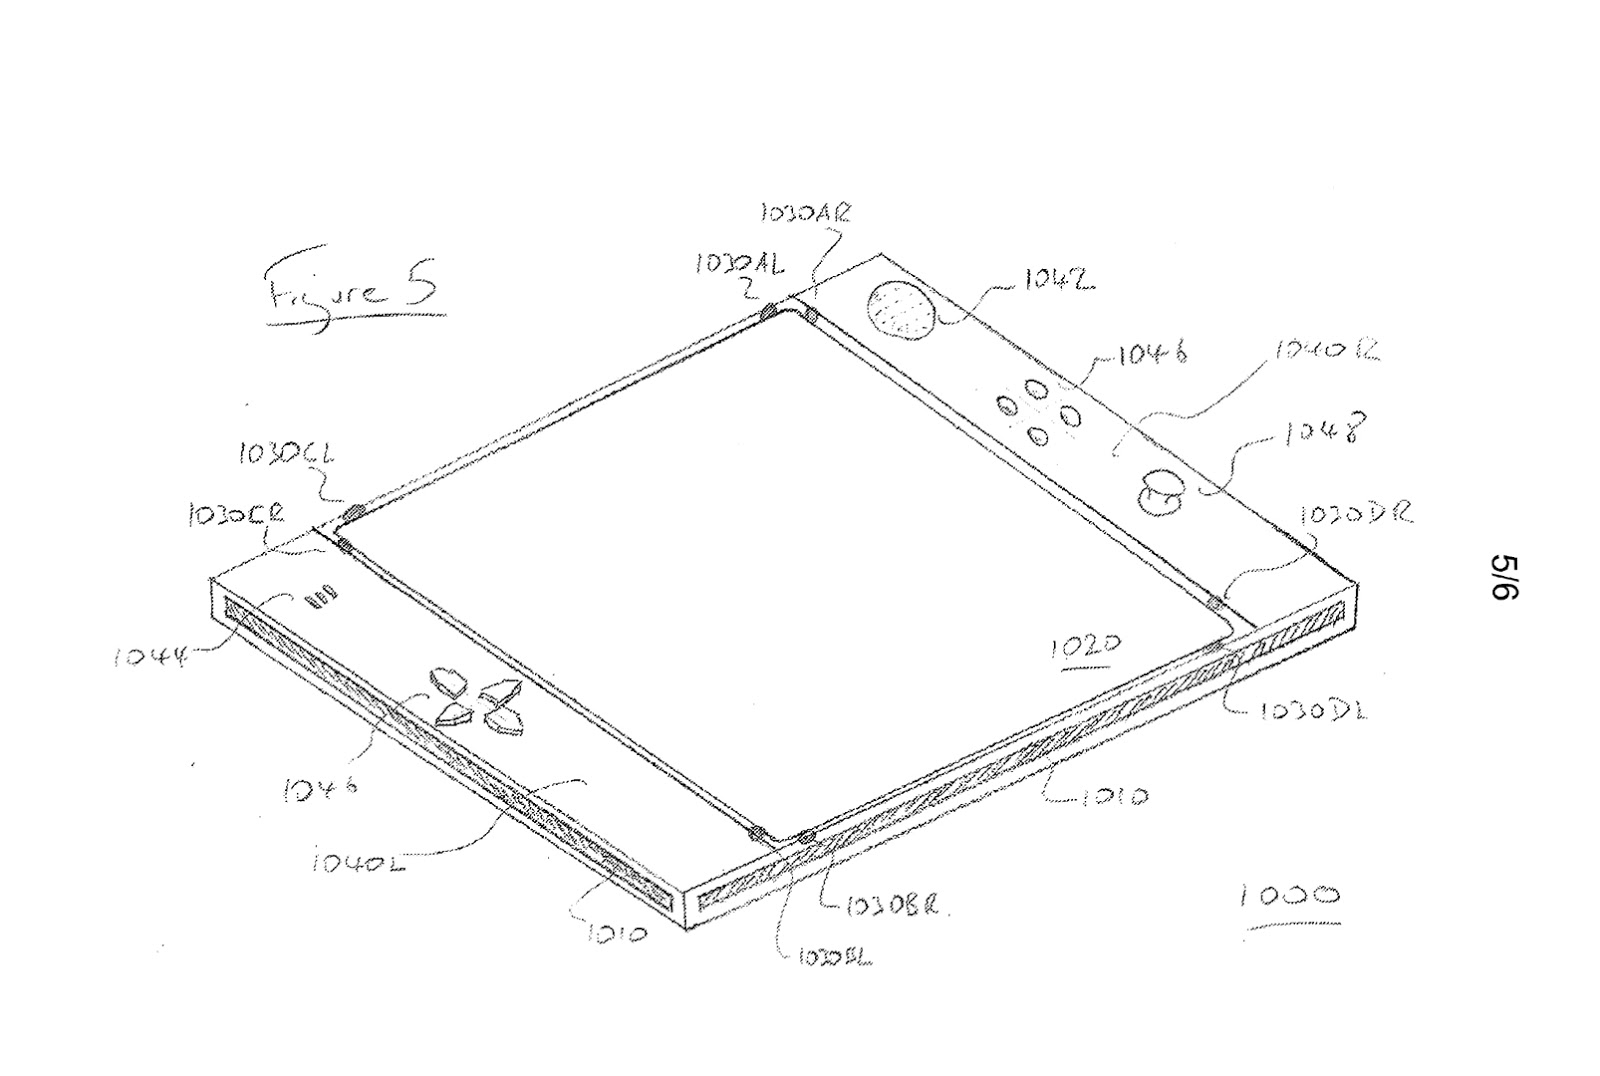 Leaked 2012 Patent Reveals ‘PlayStation Eyepad’ as Possible PS4 Controller